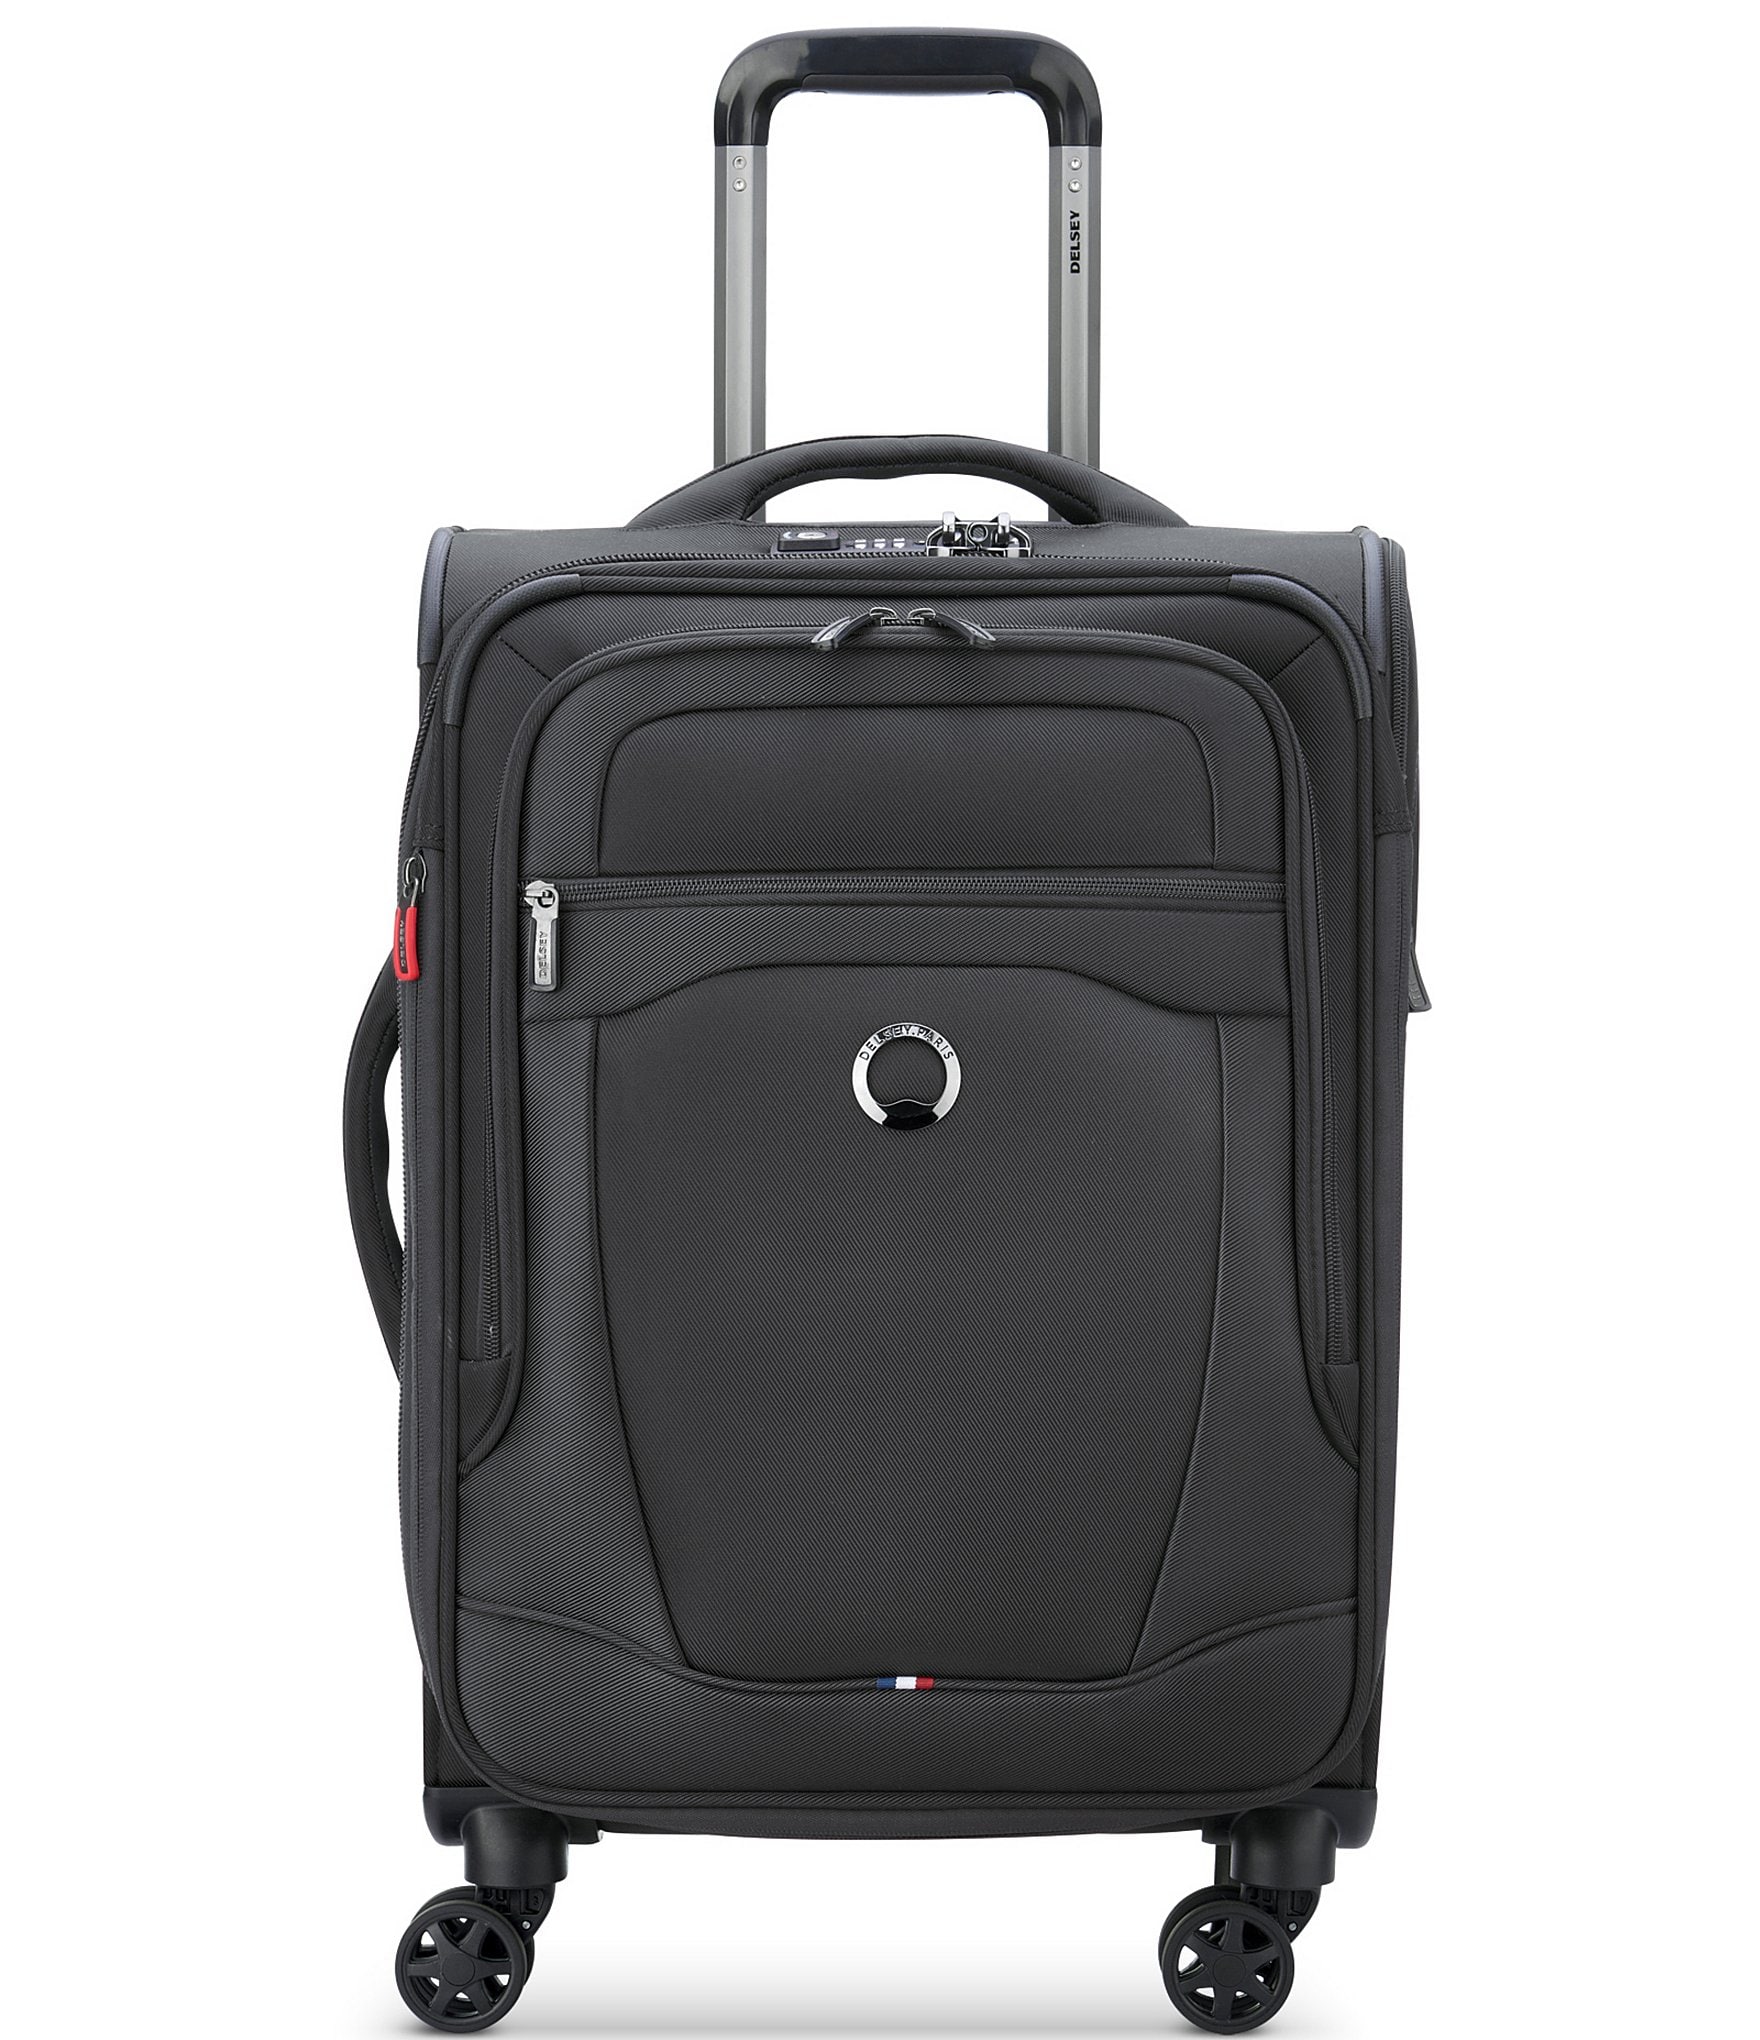 https://dimg.dillards.com/is/image/DillardsZoom/zoom/delsey-paris-velocity-softside-carry-on-spinner/00000000_zi_ce580c29-3b52-40b9-9e1d-22ff316a57a3.jpg